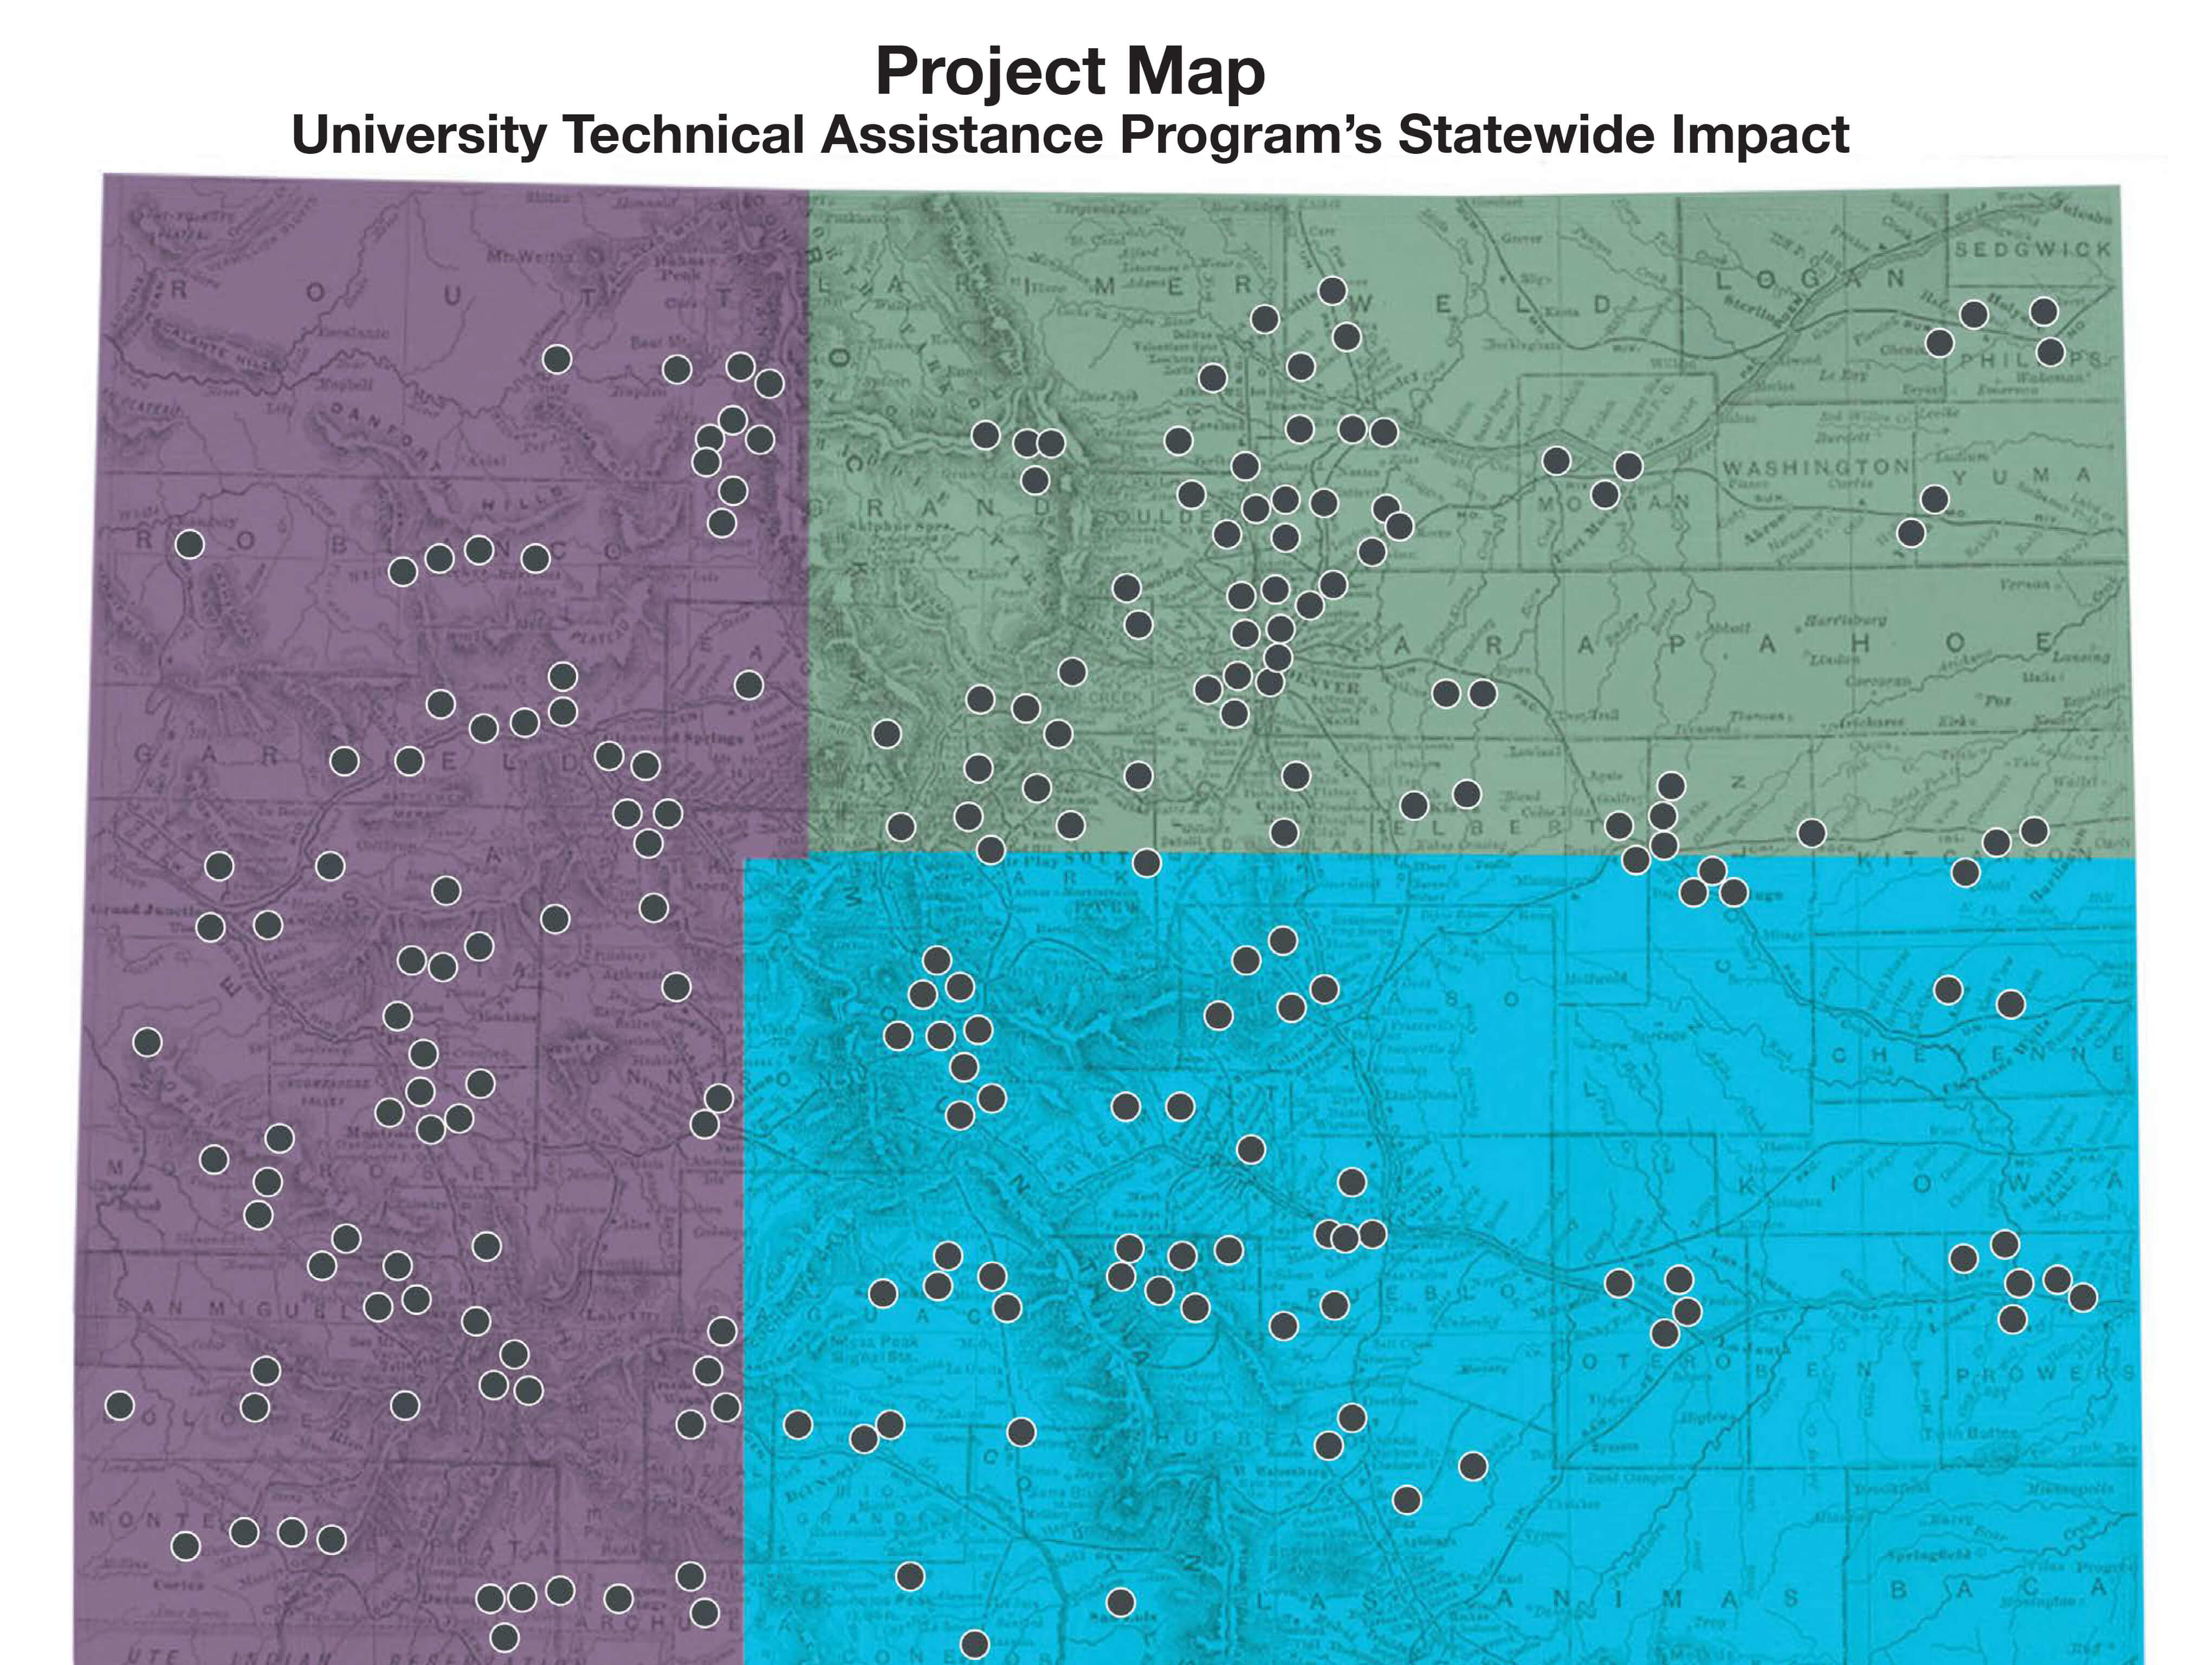 Project Map for the University Technical Assistance Program's Statewide Impact